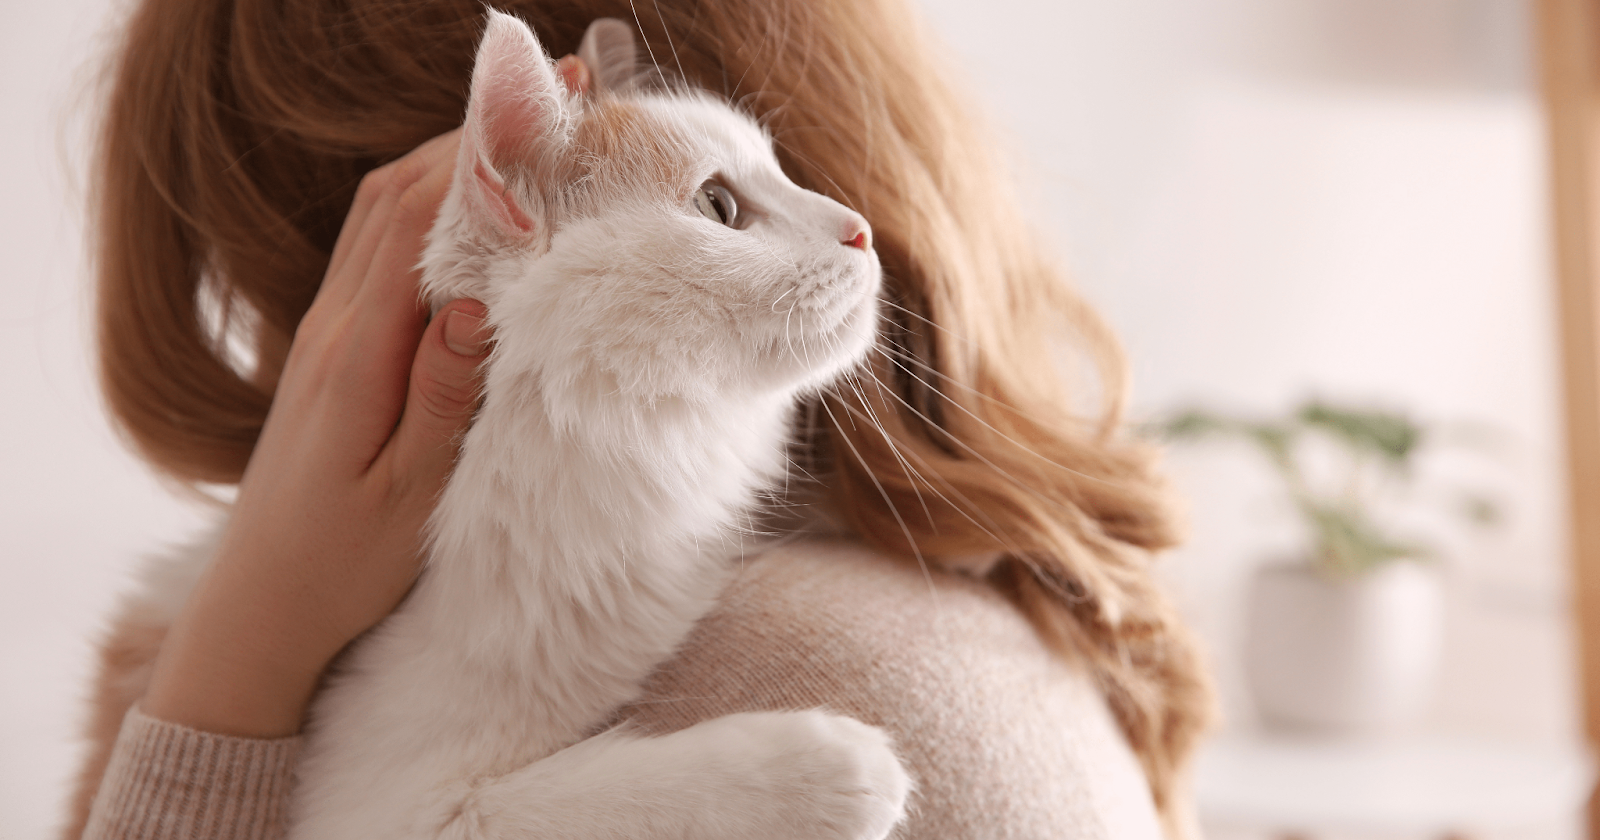 Woman hugging white cat that is looking over her shoulder